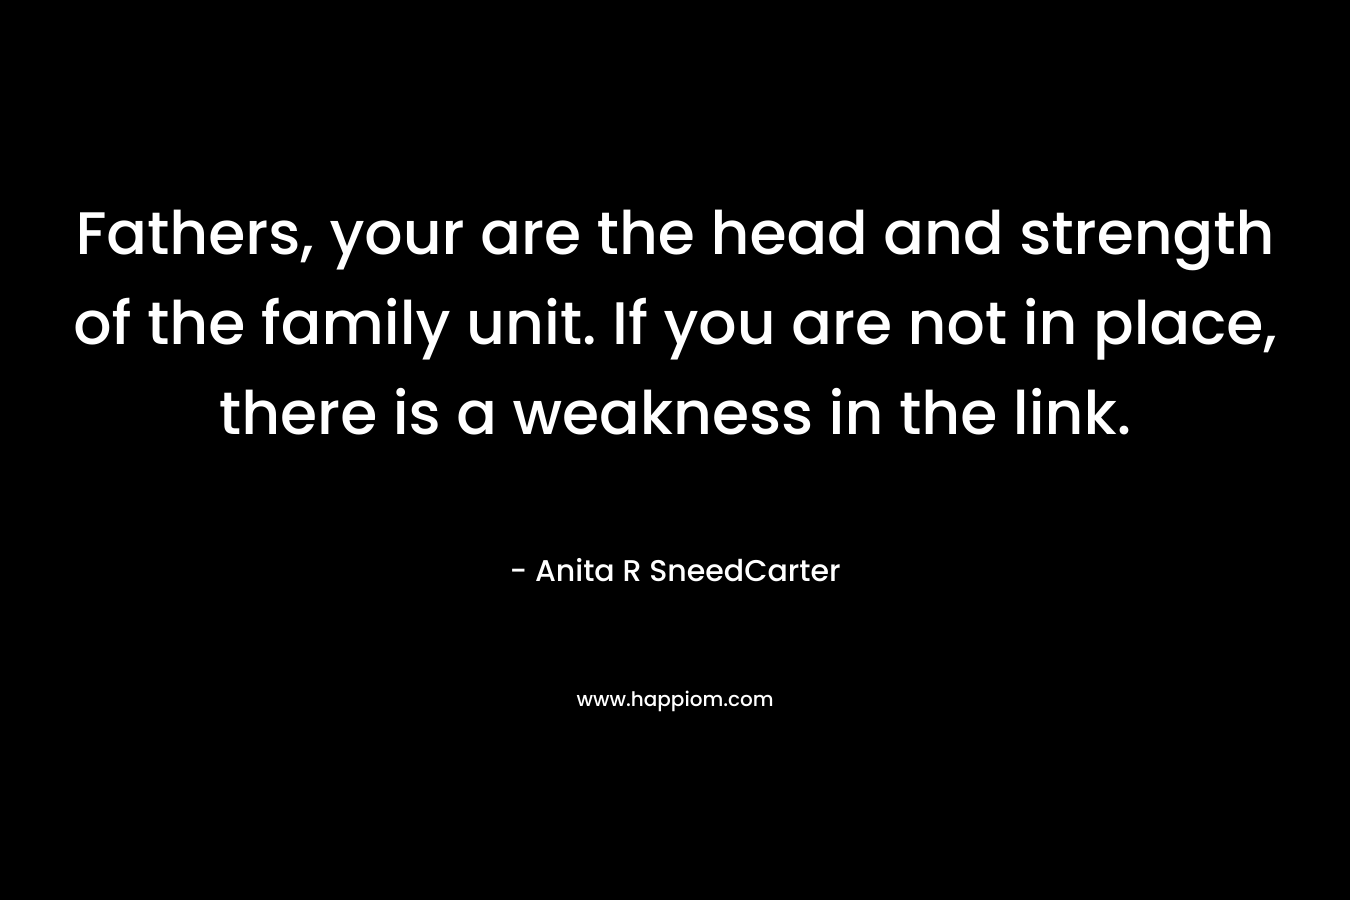 Fathers, your are the head and strength of the family unit. If you are not in place, there is a weakness in the link. – Anita R SneedCarter